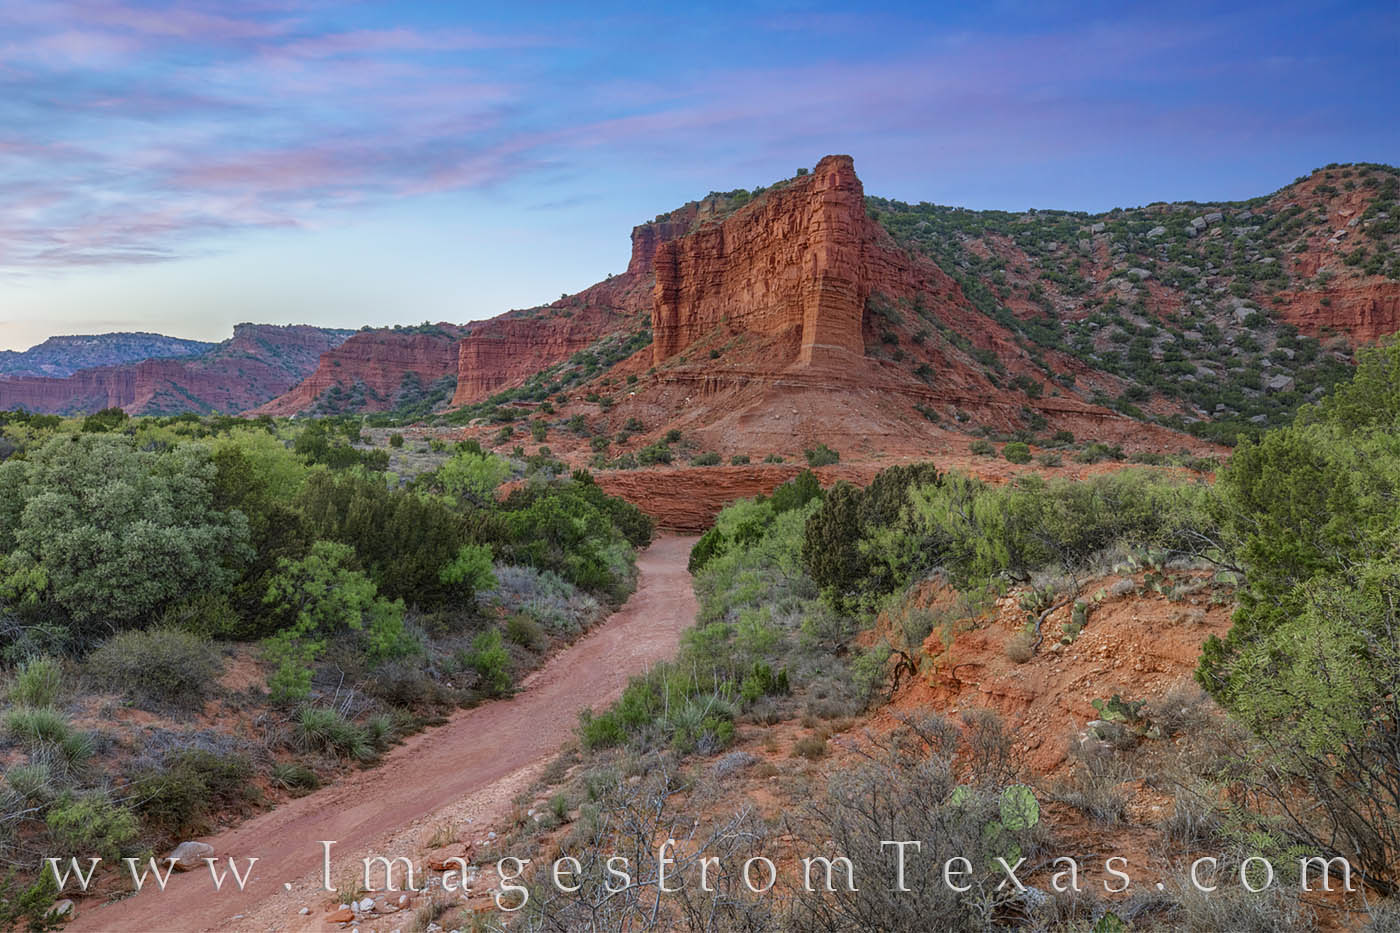 Clouds change from white to pink to darker hues over Caprock Canyons State Park on a cool October evening. This view comes from...